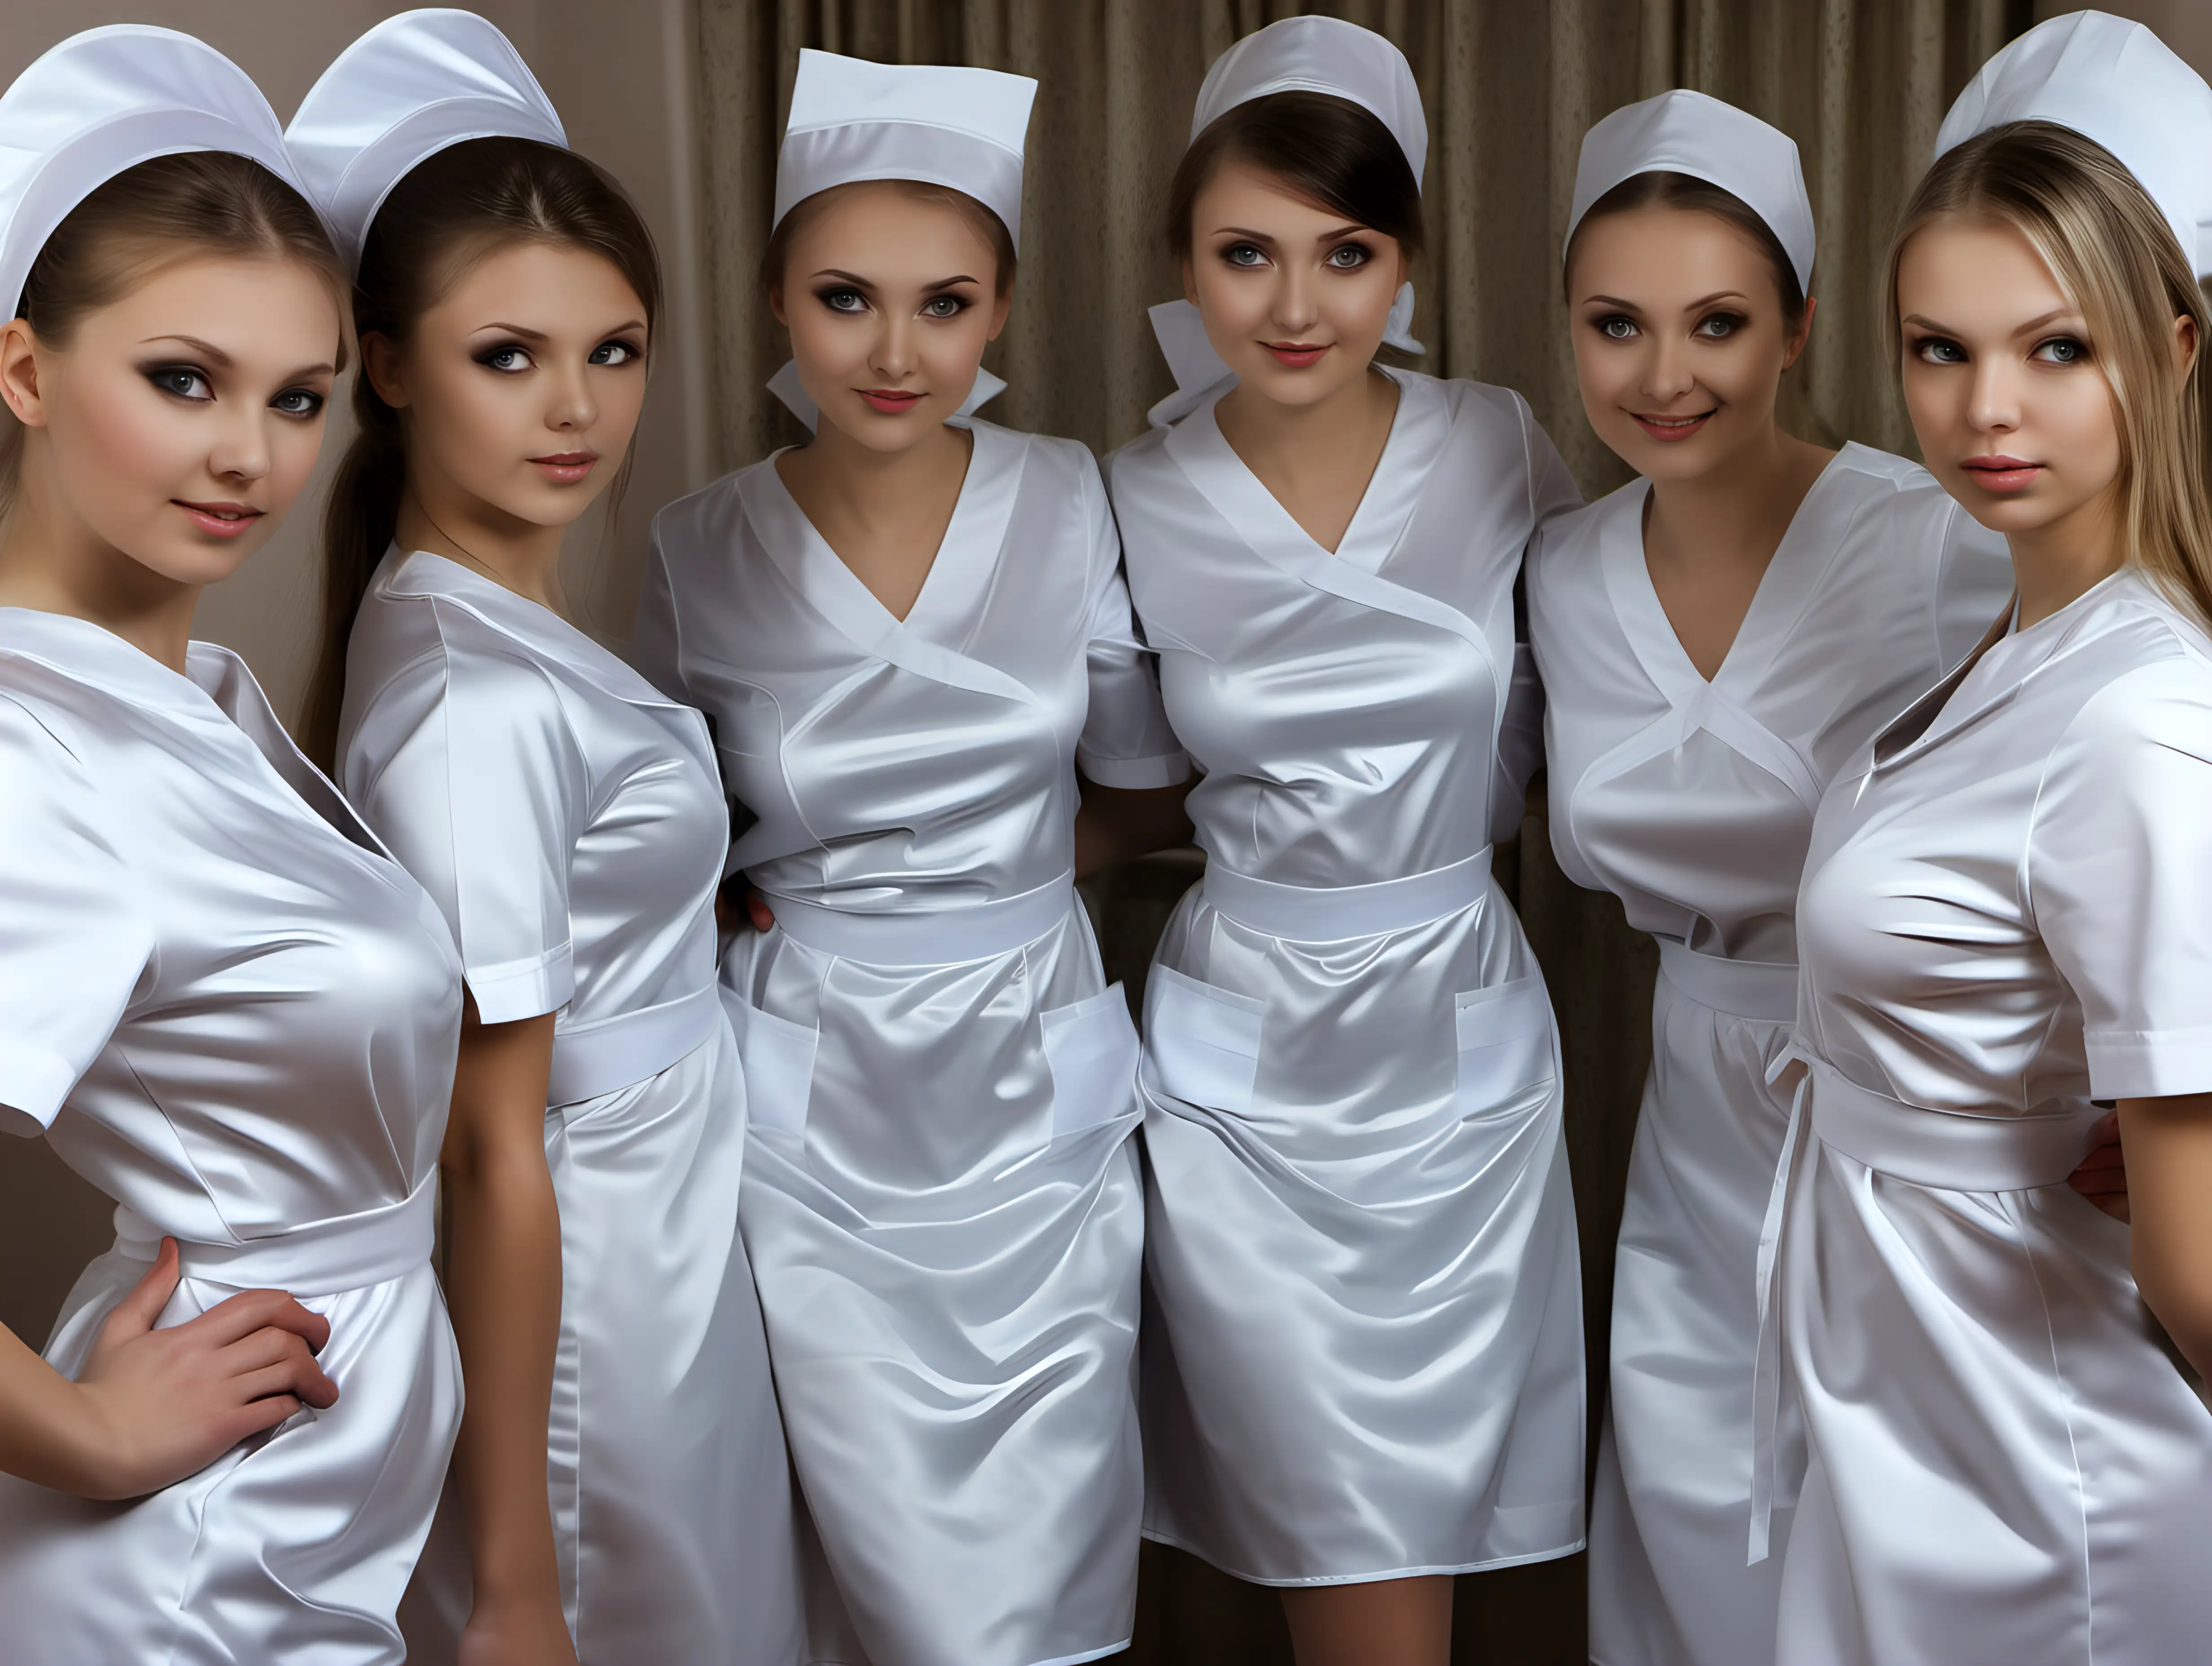 russian girl in satin nurse uniforms and oldmothers